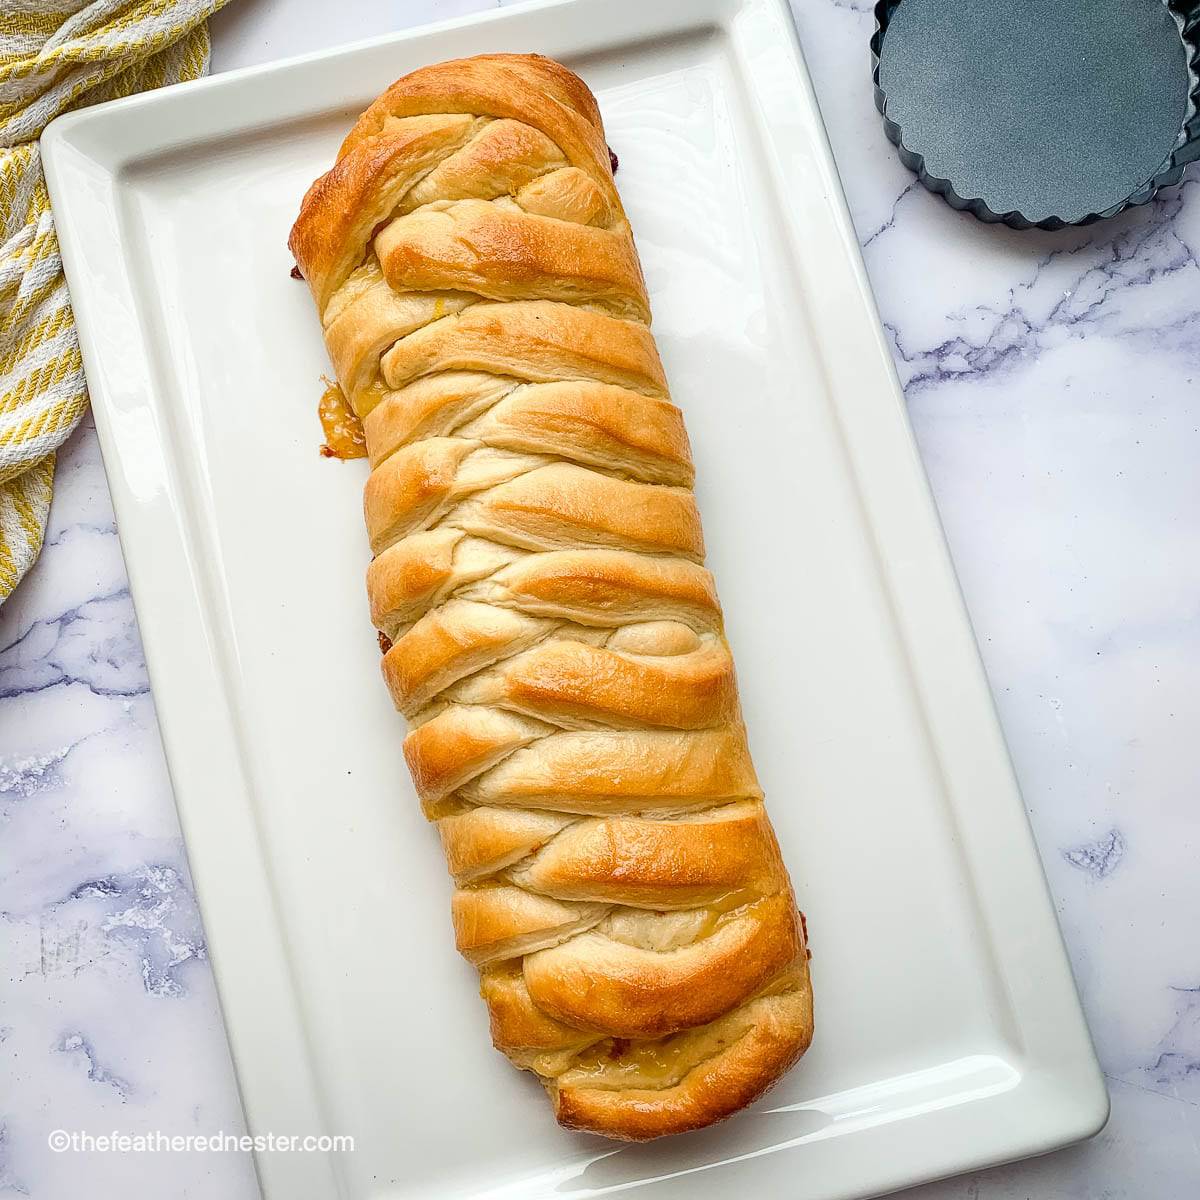 Overhead view of a lemon braided bread loaf placed on a white plate.